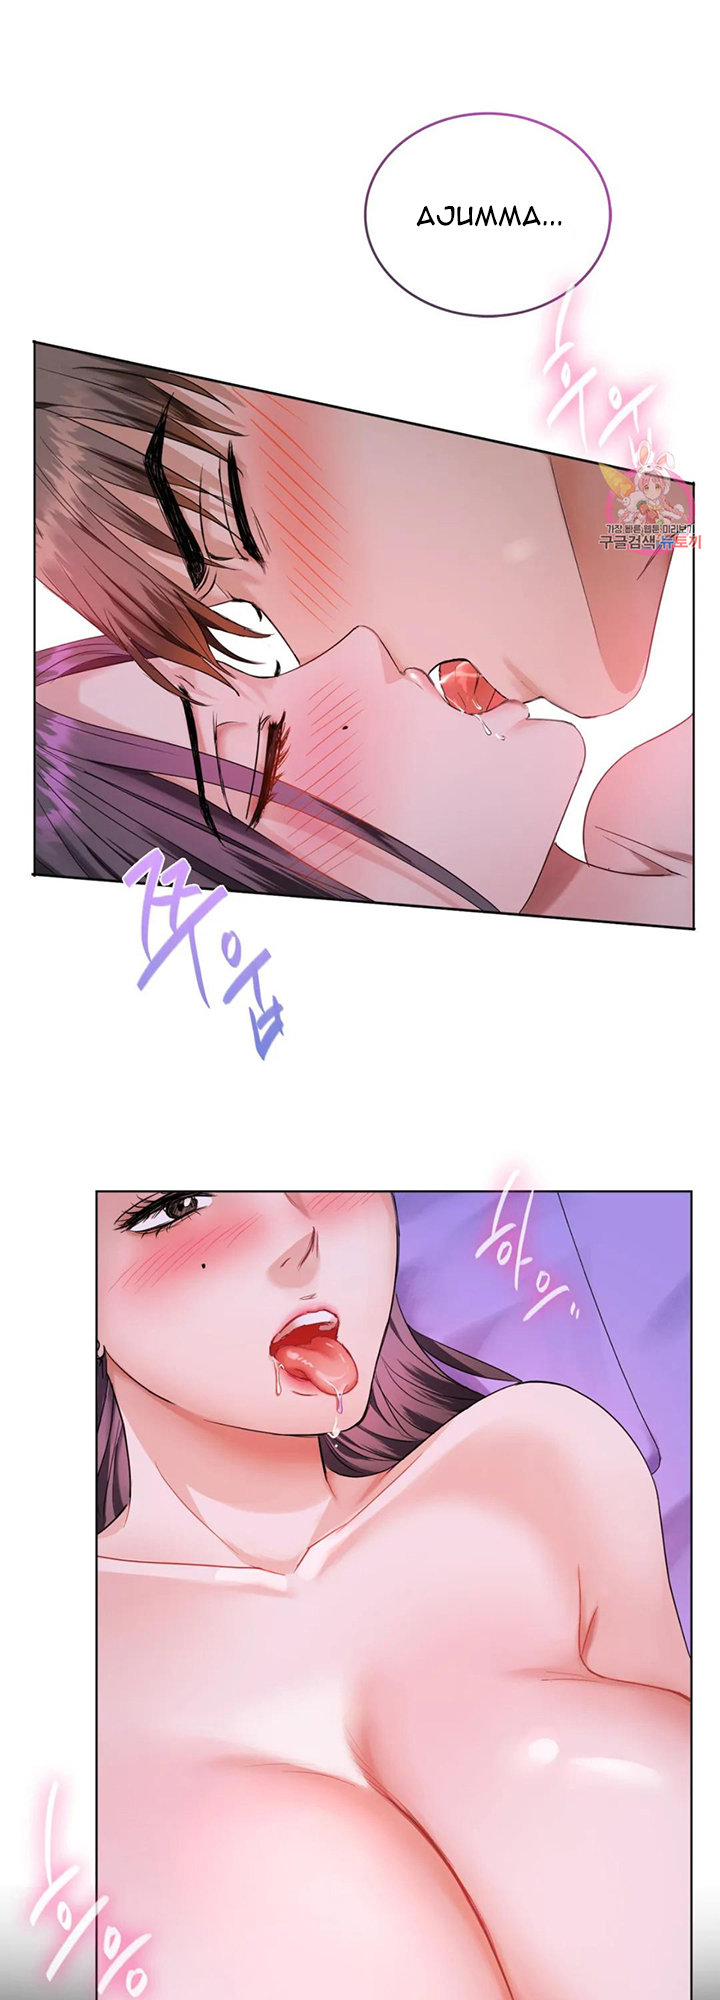 I Can’t Stand It, Ajumma - Chapter 4 Page 2